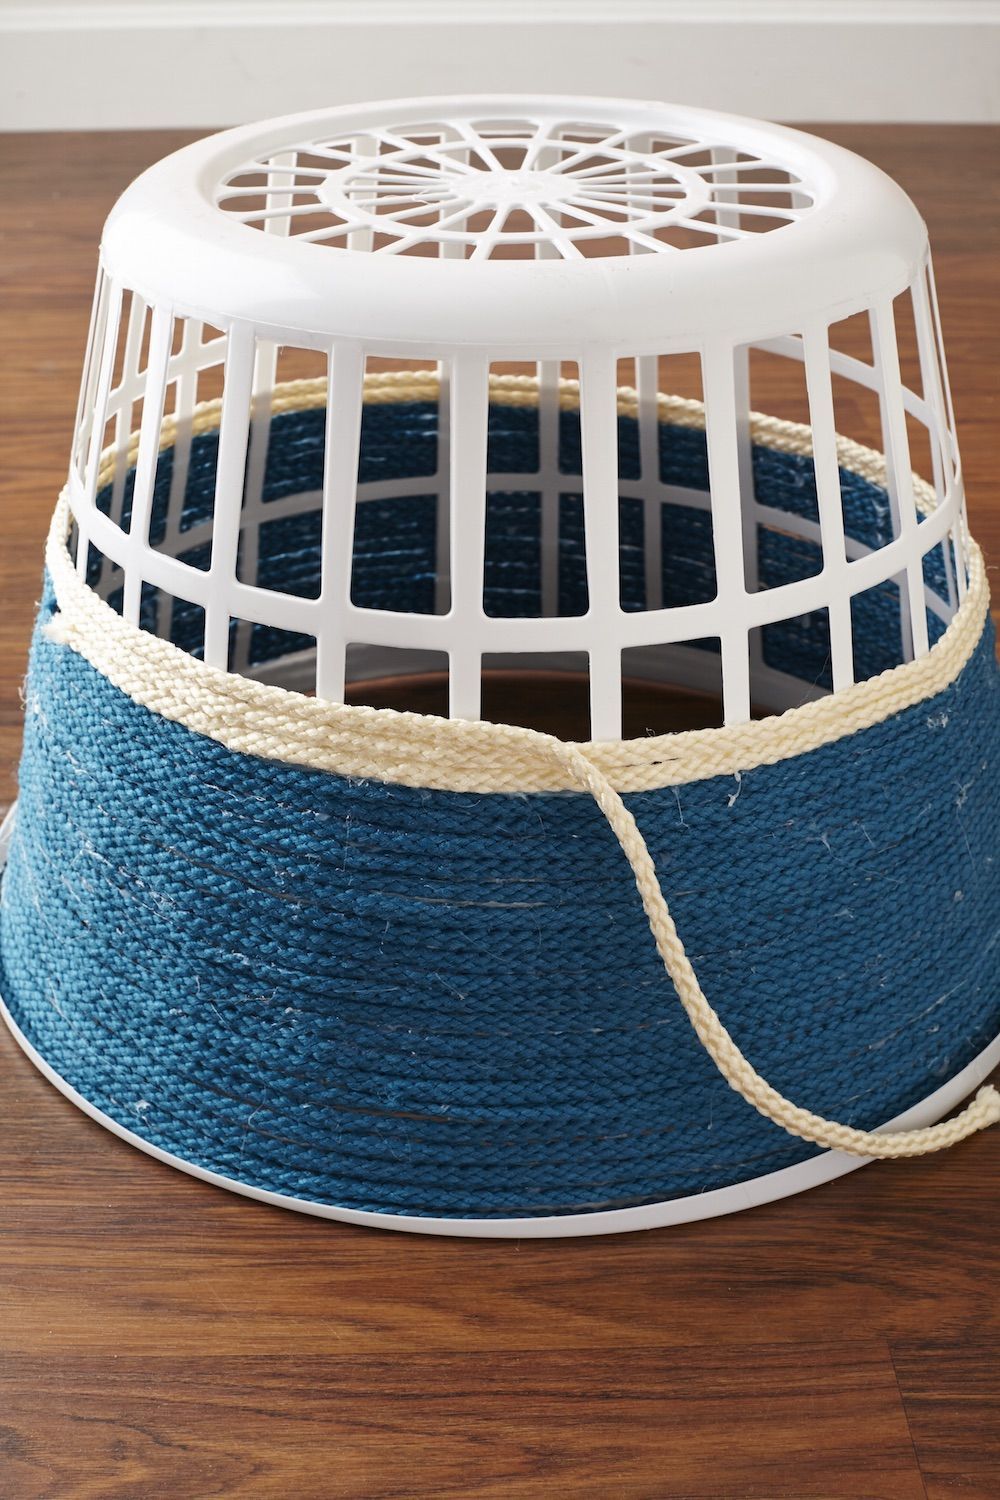 Turn That Ugly AF Laundry Basket Into Pretty Decor In 3 Easy Steps